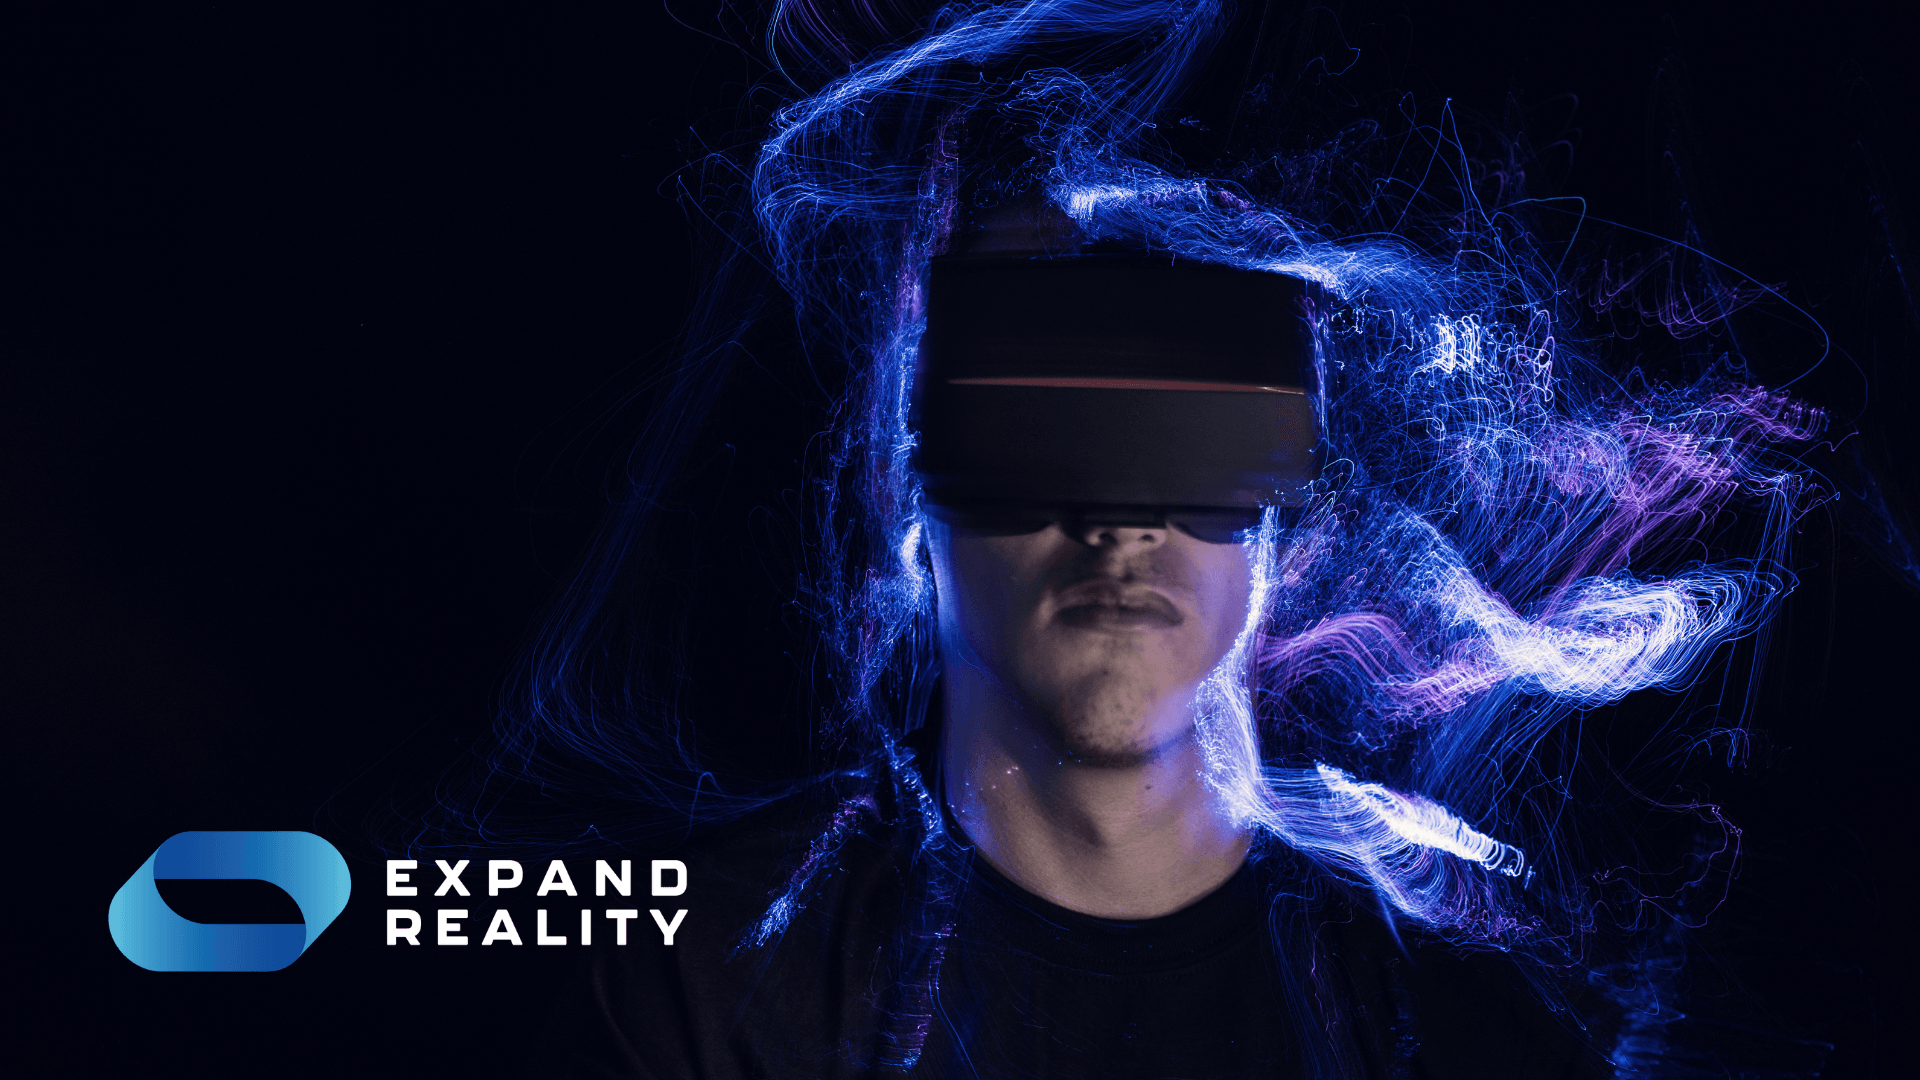 Welcome to Expand Reality! Learn what we do, why we do it, and how you can use our XR technology to boost productivity and remote collaboration.